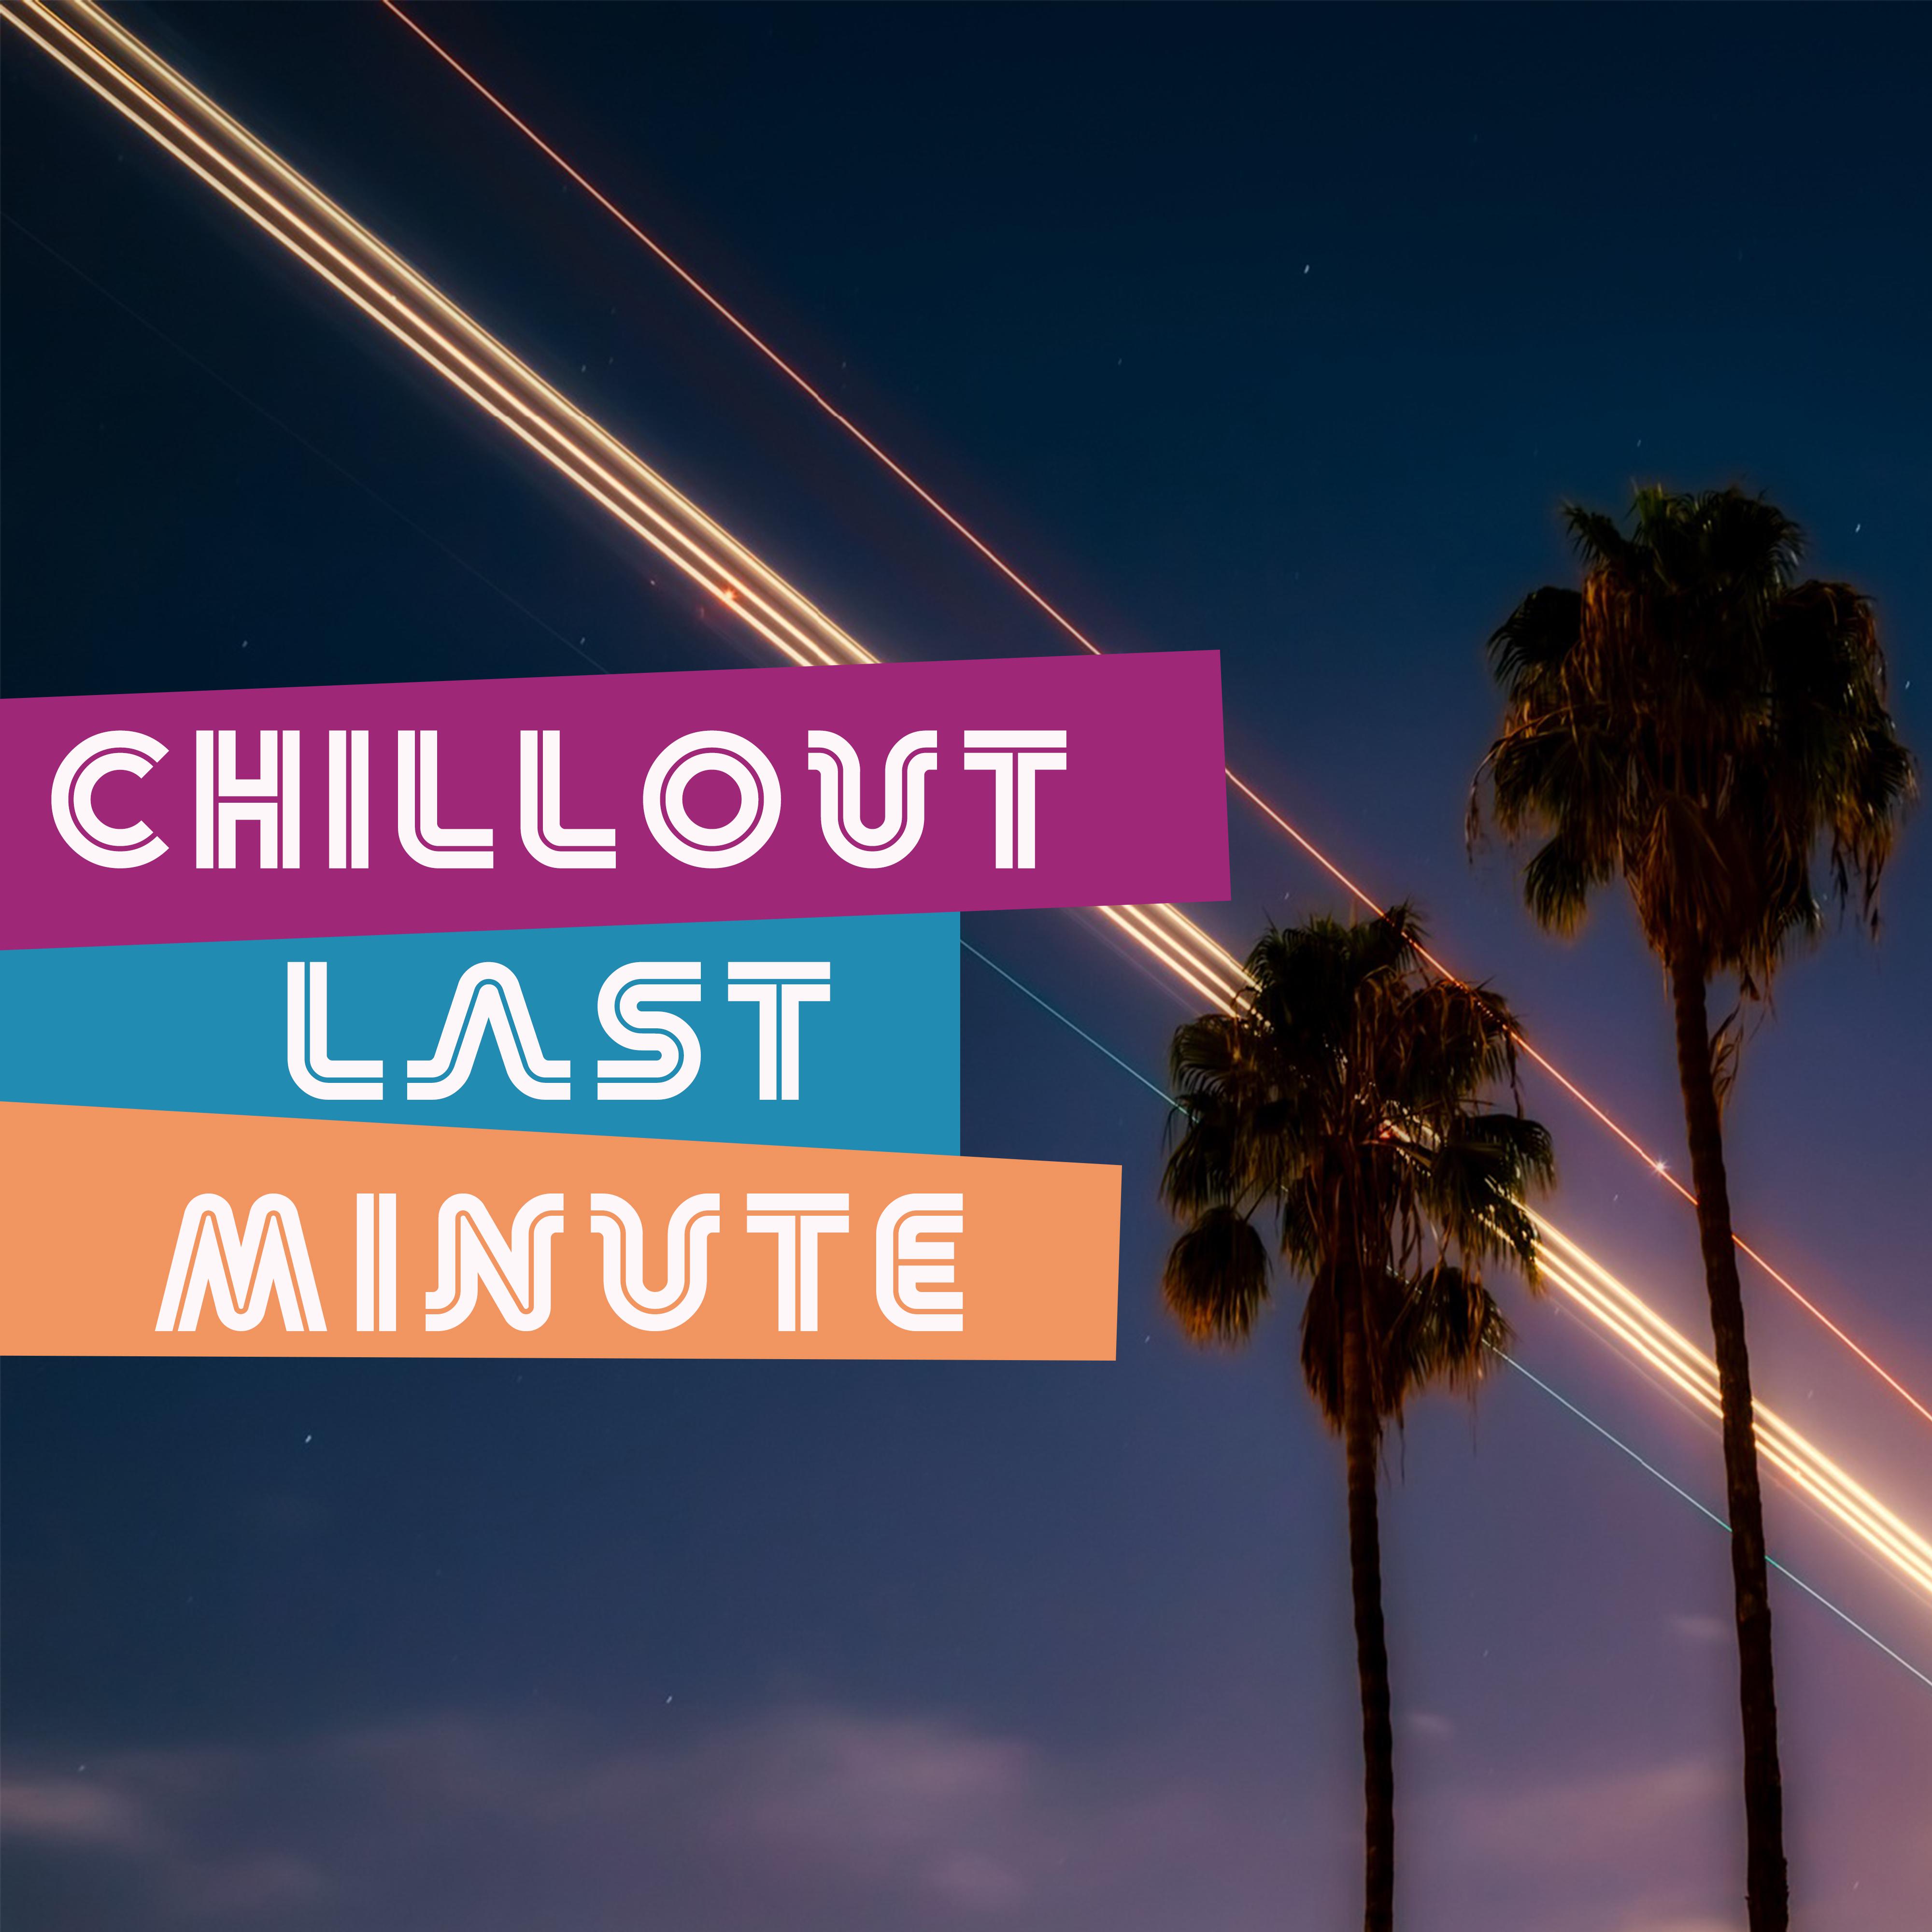 Chillout Last Minute